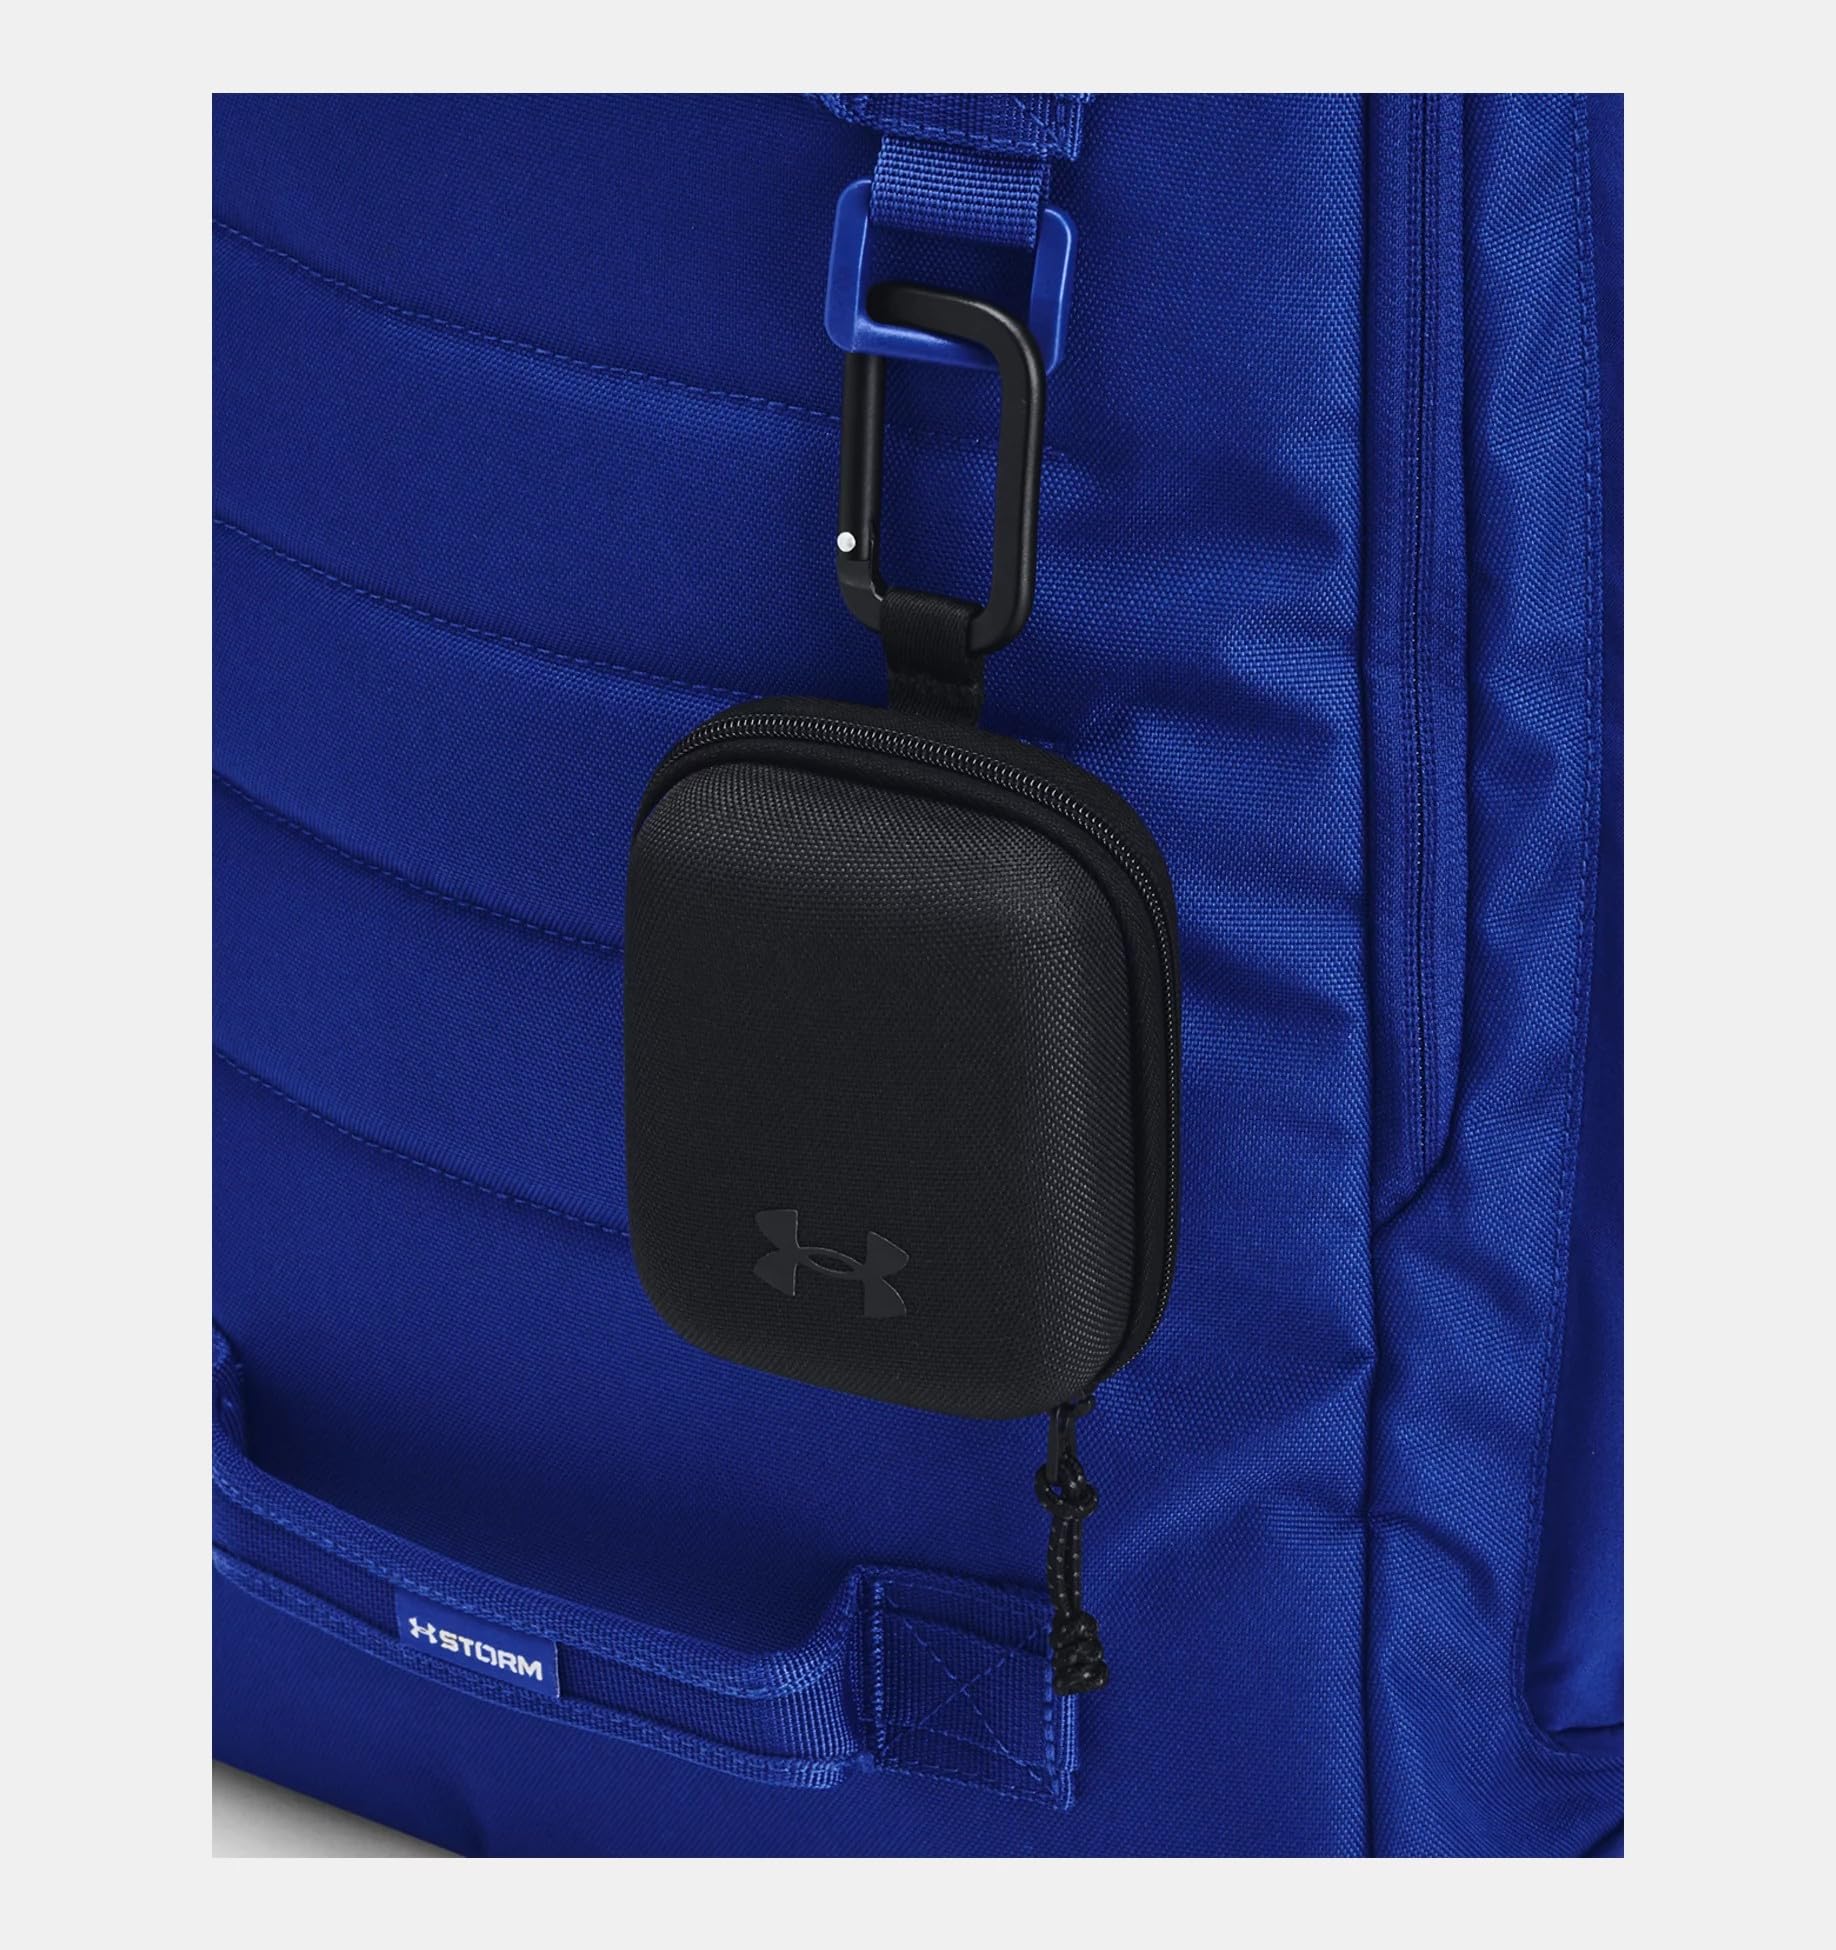 Under Armour Unisex-Adult Micro Essentials Container, (410) Midnight Navy/Midnight Navy/White, One Size Fits Most